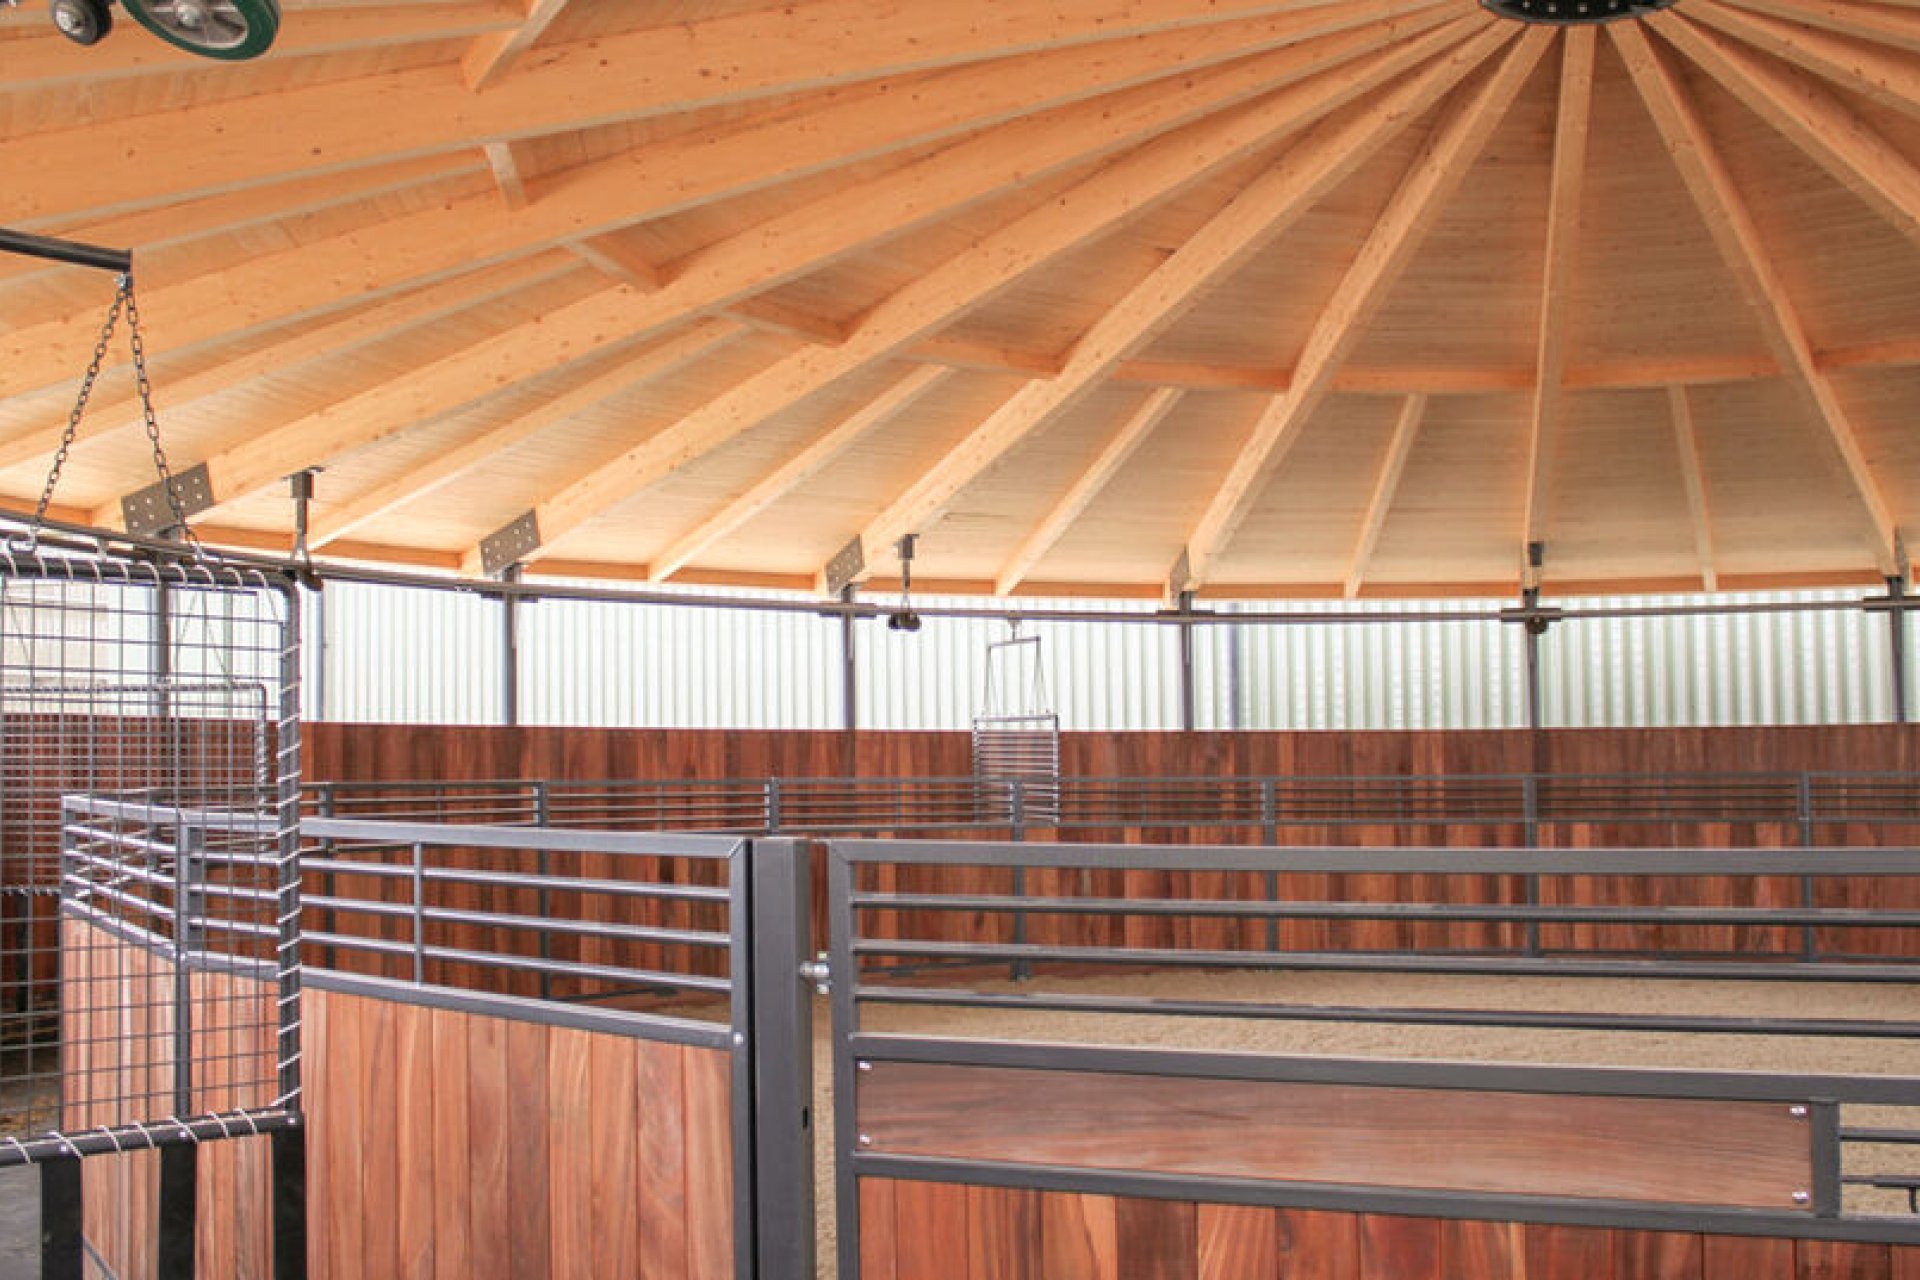 Interior view of a horse walker with roof made entirely of wood